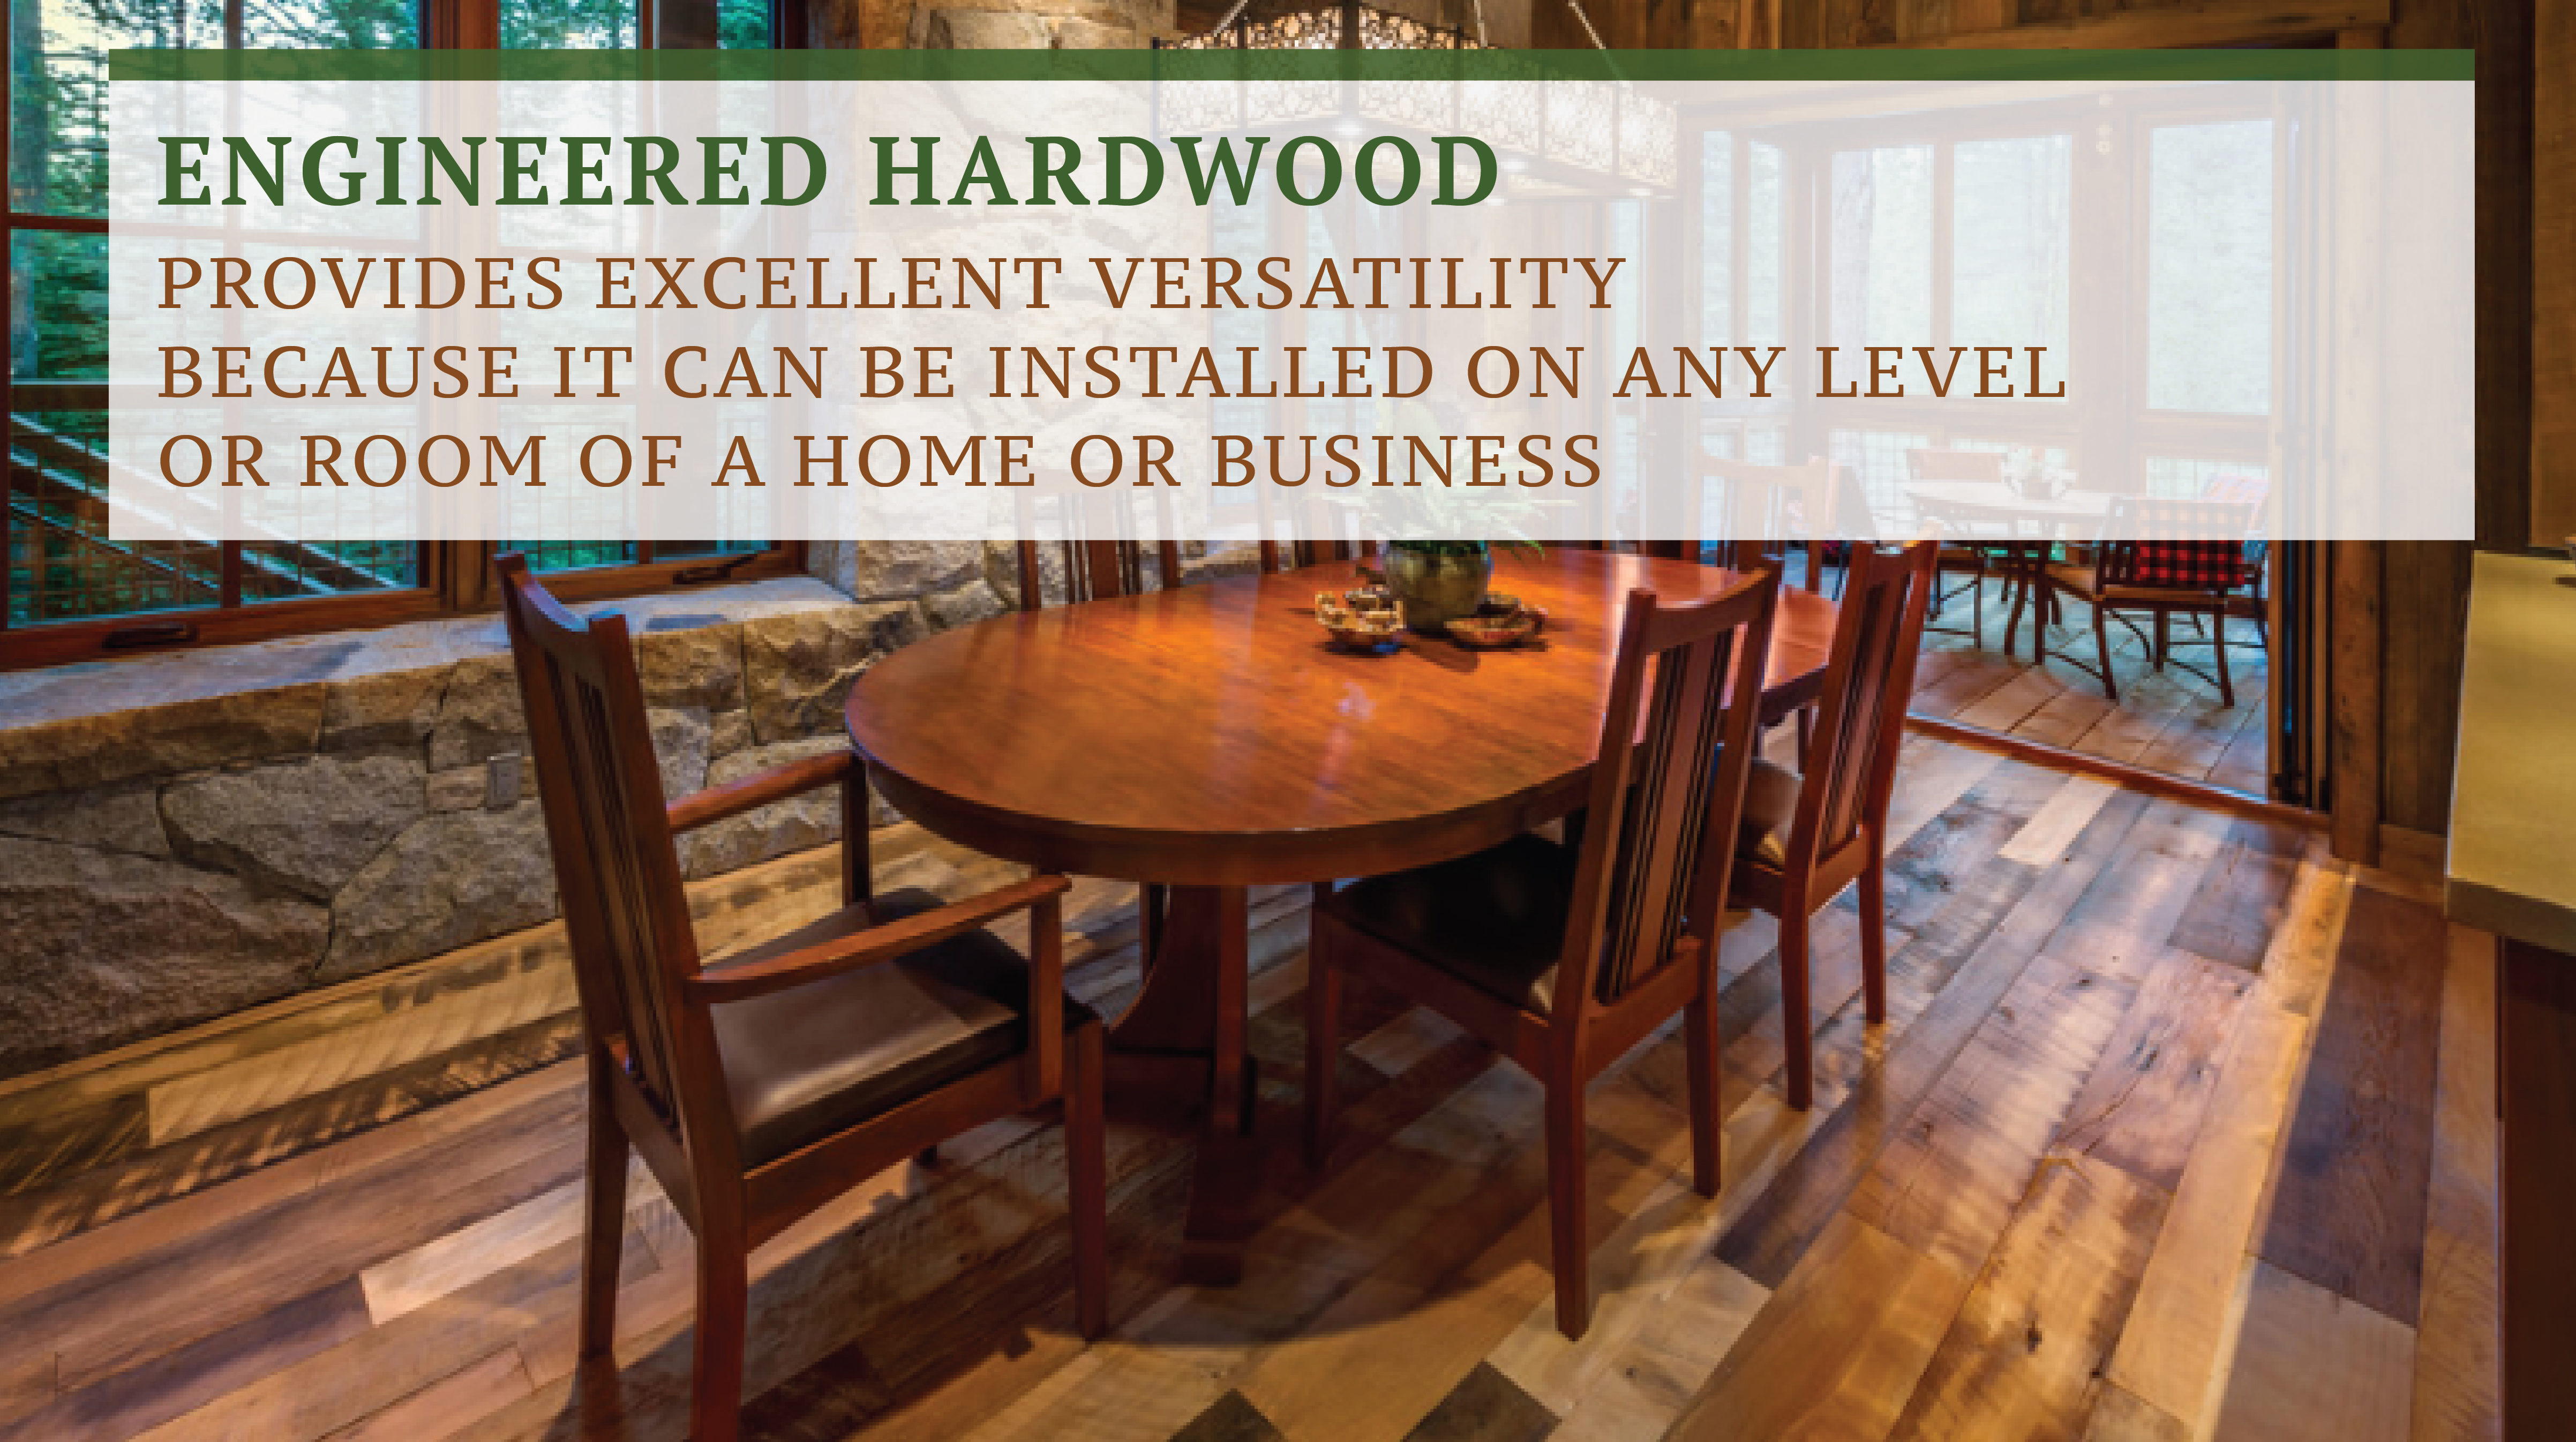 Engineered Hardwoods Are Versatile and Can be Installed in Many Rooms